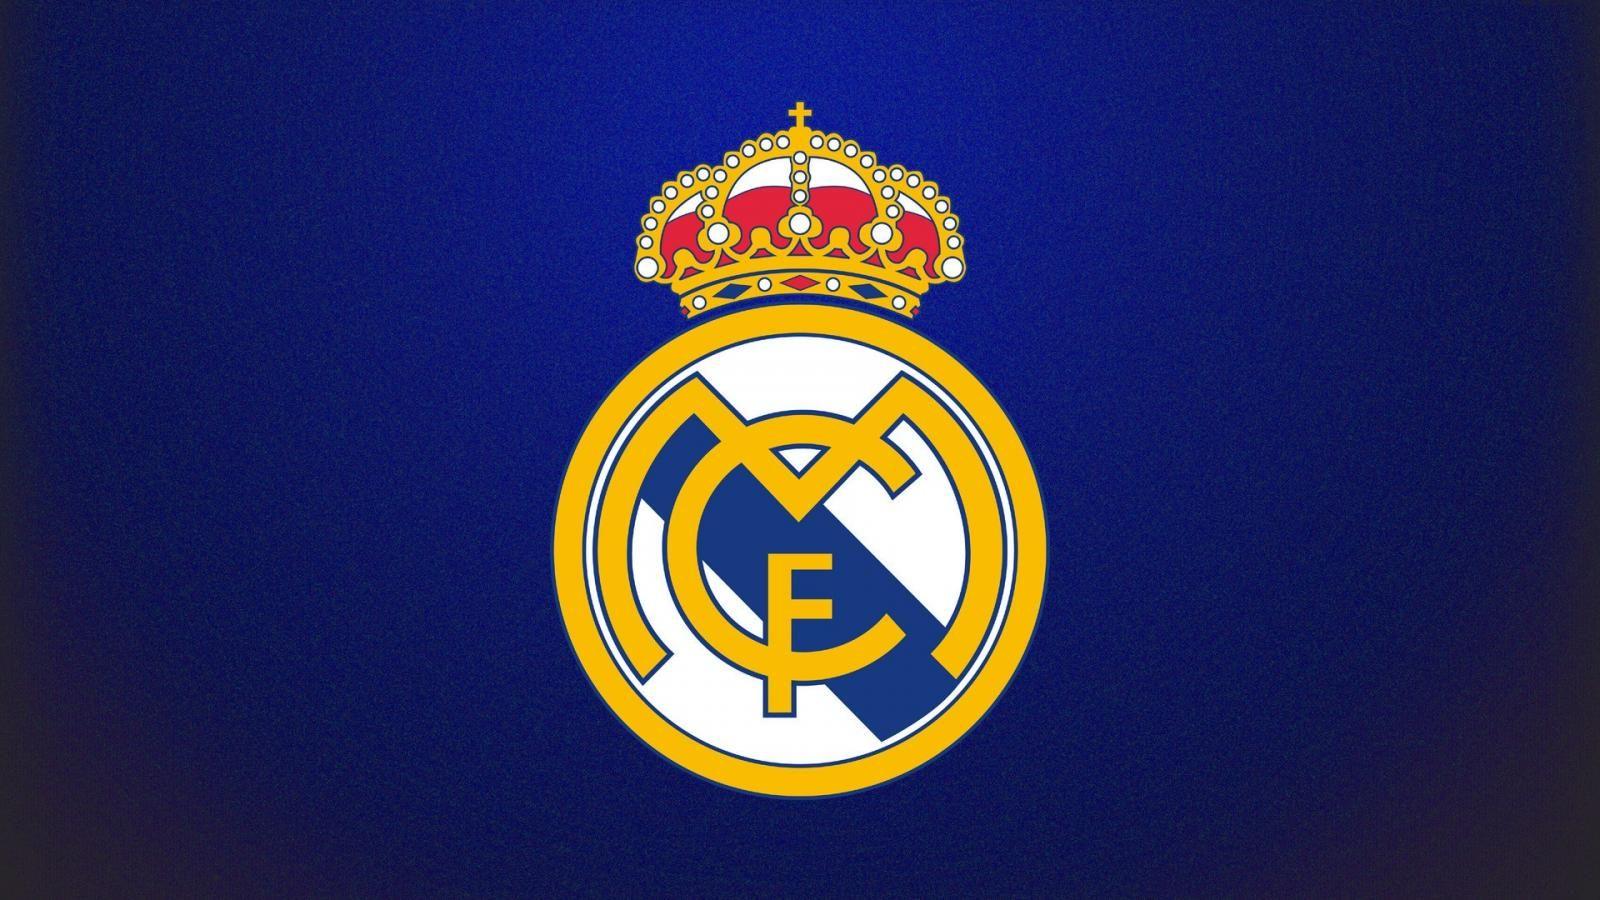 Desktop Image About Real Madrid Soccer On Fc HD For Computer. Full